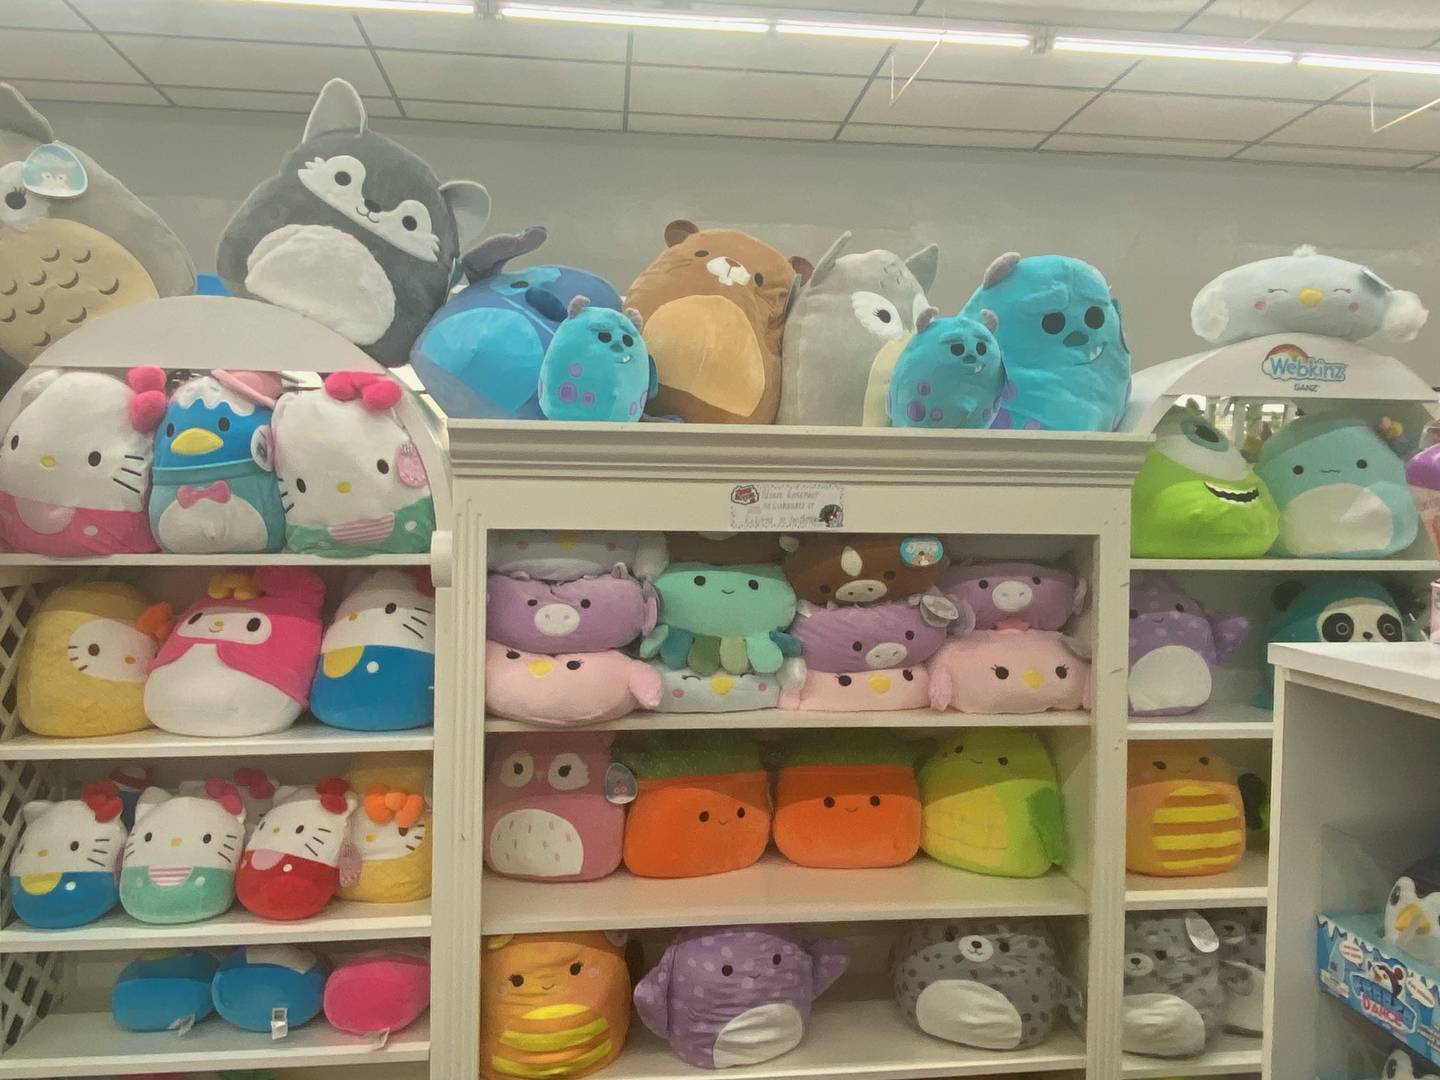 Kerr’s connections has enabled her to keep, even the most popular items on her shelf- such as the pop-culture phenomenon, Squishmallows.